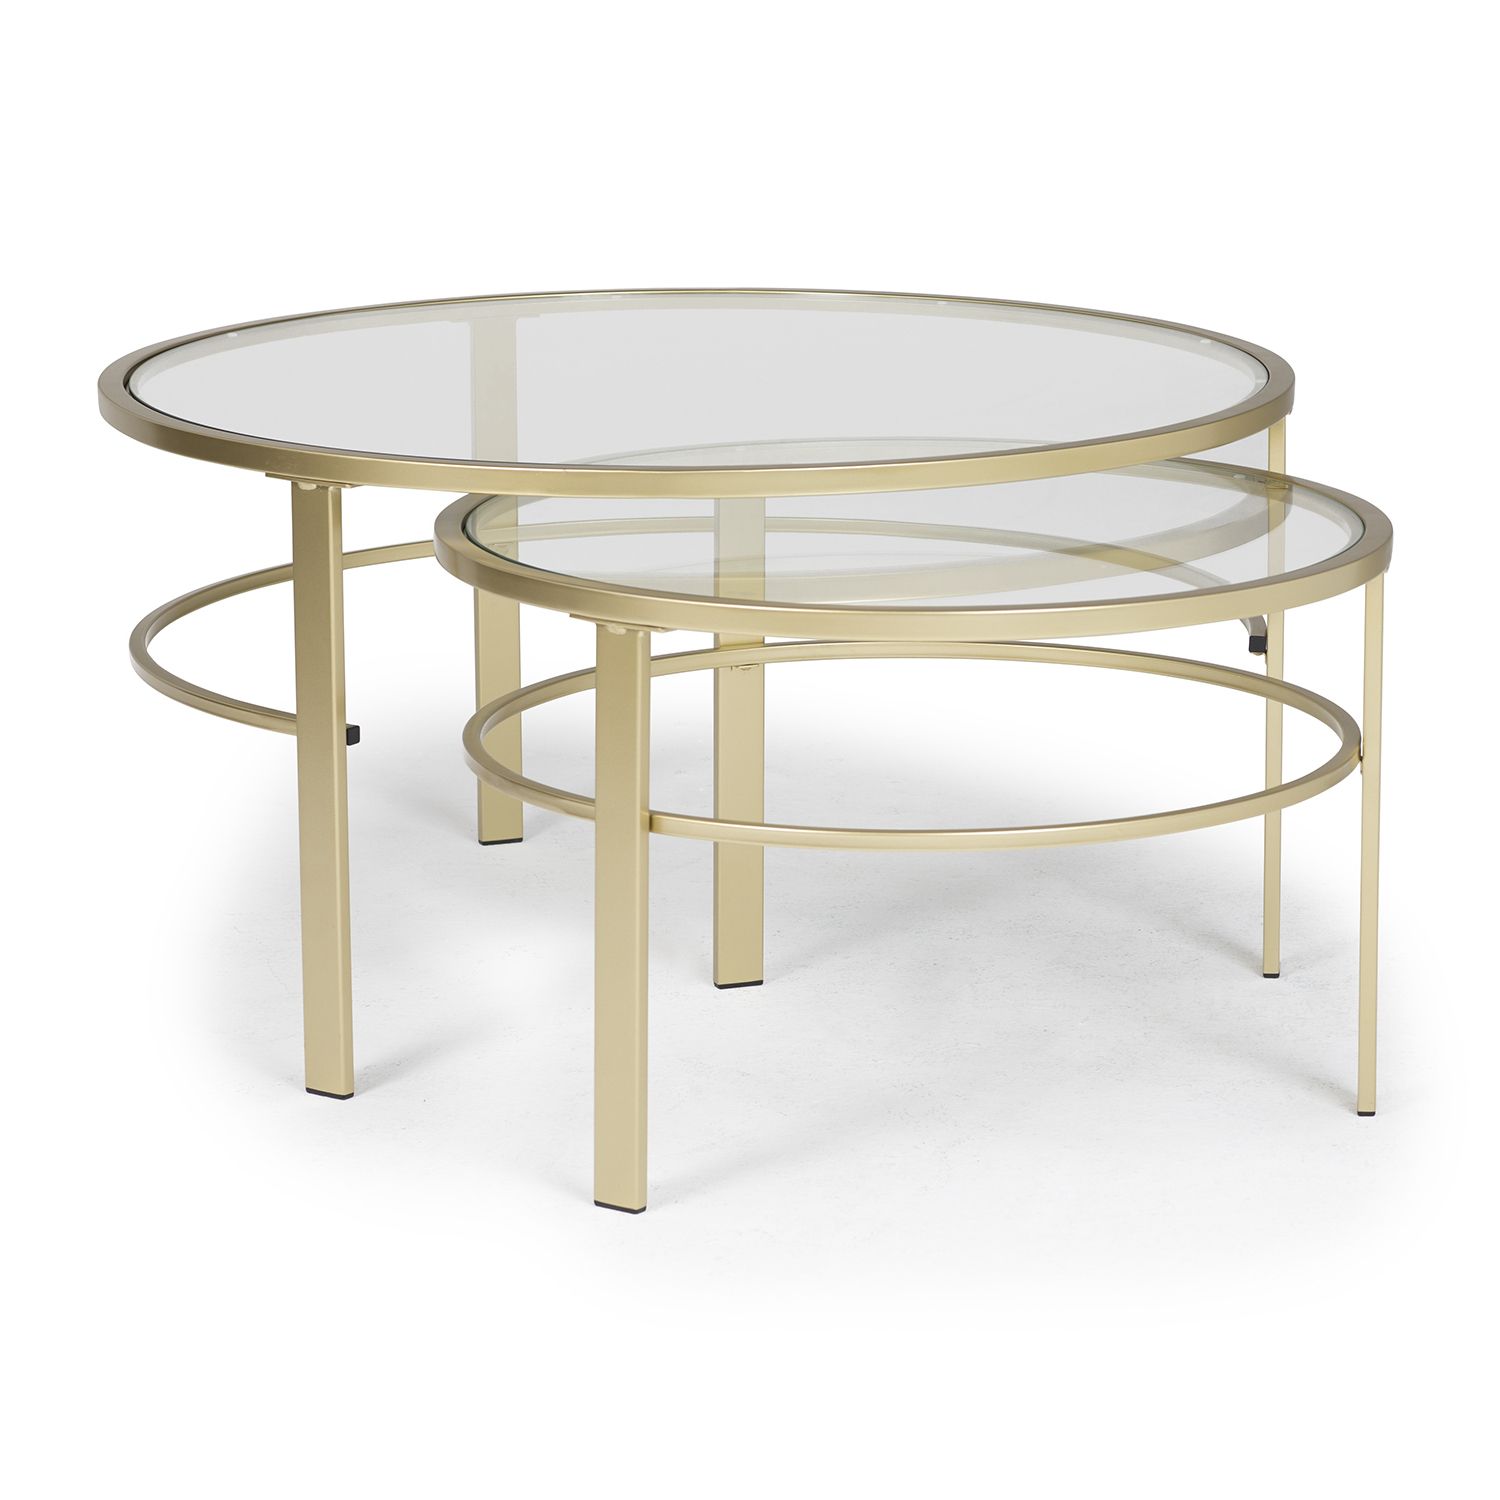 Preferred Antique Gold Nesting Coffee Tables Intended For Corbel Modern Round Nesting Coffee Table Set (36" W & 26"w (View 2 of 20)